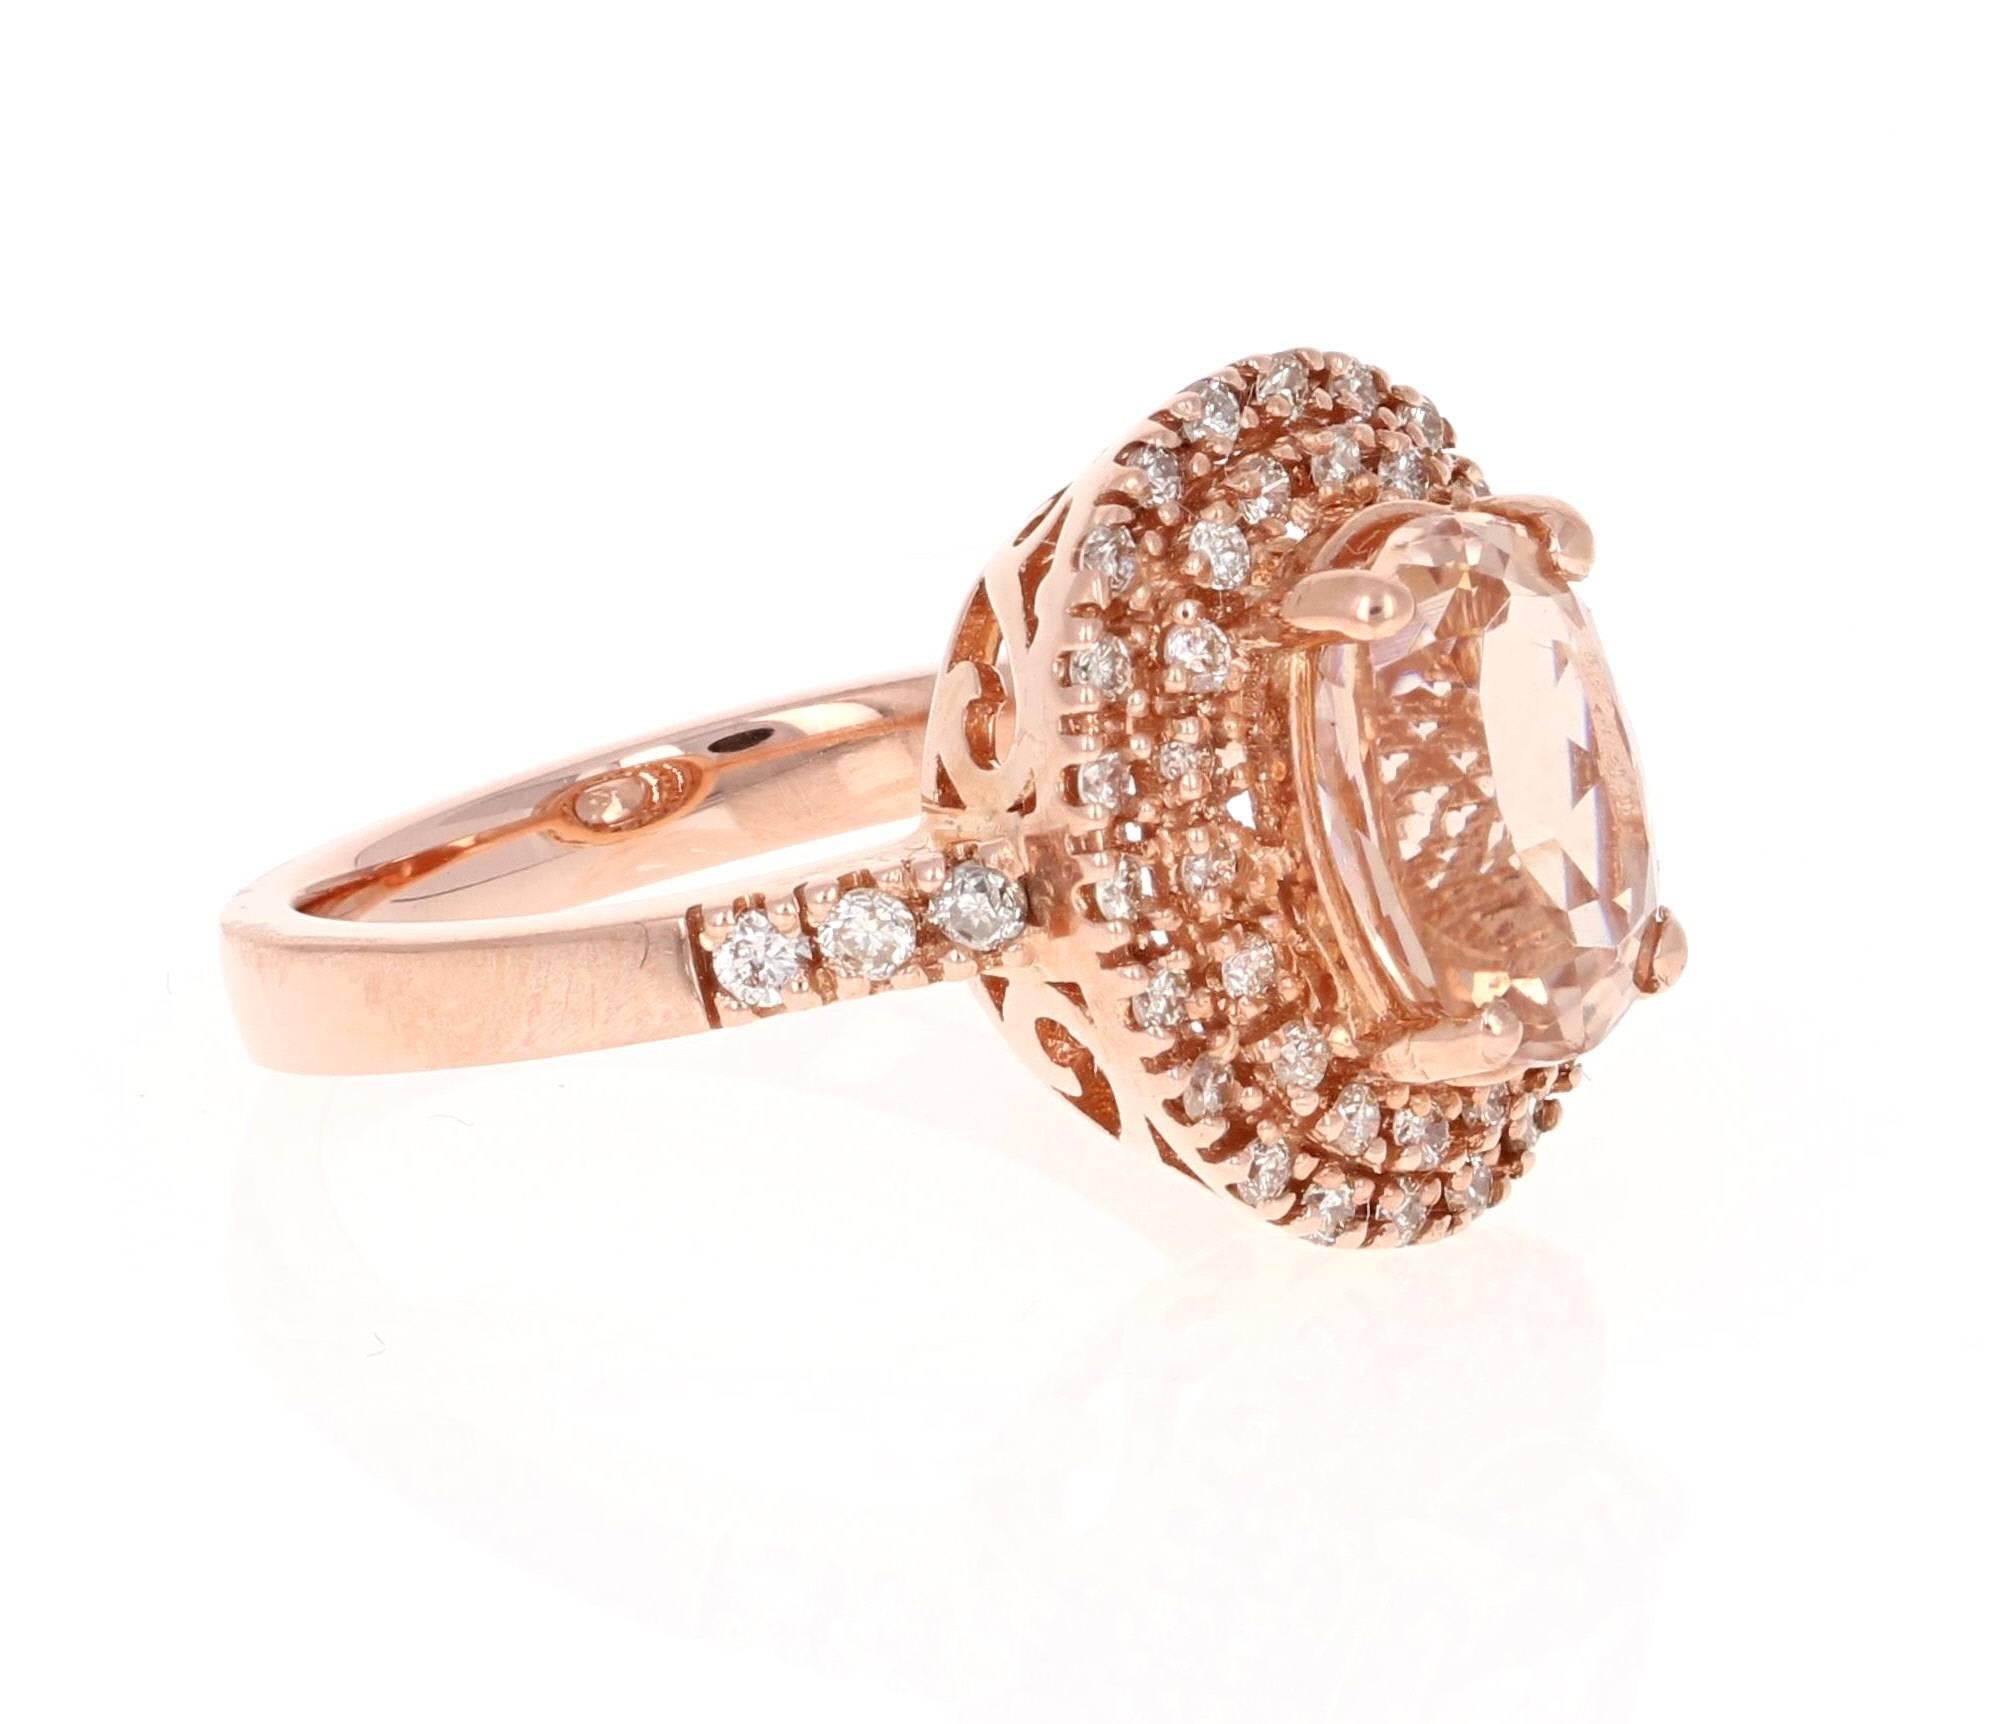 This ring is a 14K Rose Gold Ring which has a 2.76 carat Oval Cut Morganite in the center of the ring.  This ring is surrounded by a double halo of 46 Round Cut Diamonds that weigh a total of 0.52 carat.  The total carat weight of the ring is 3.28